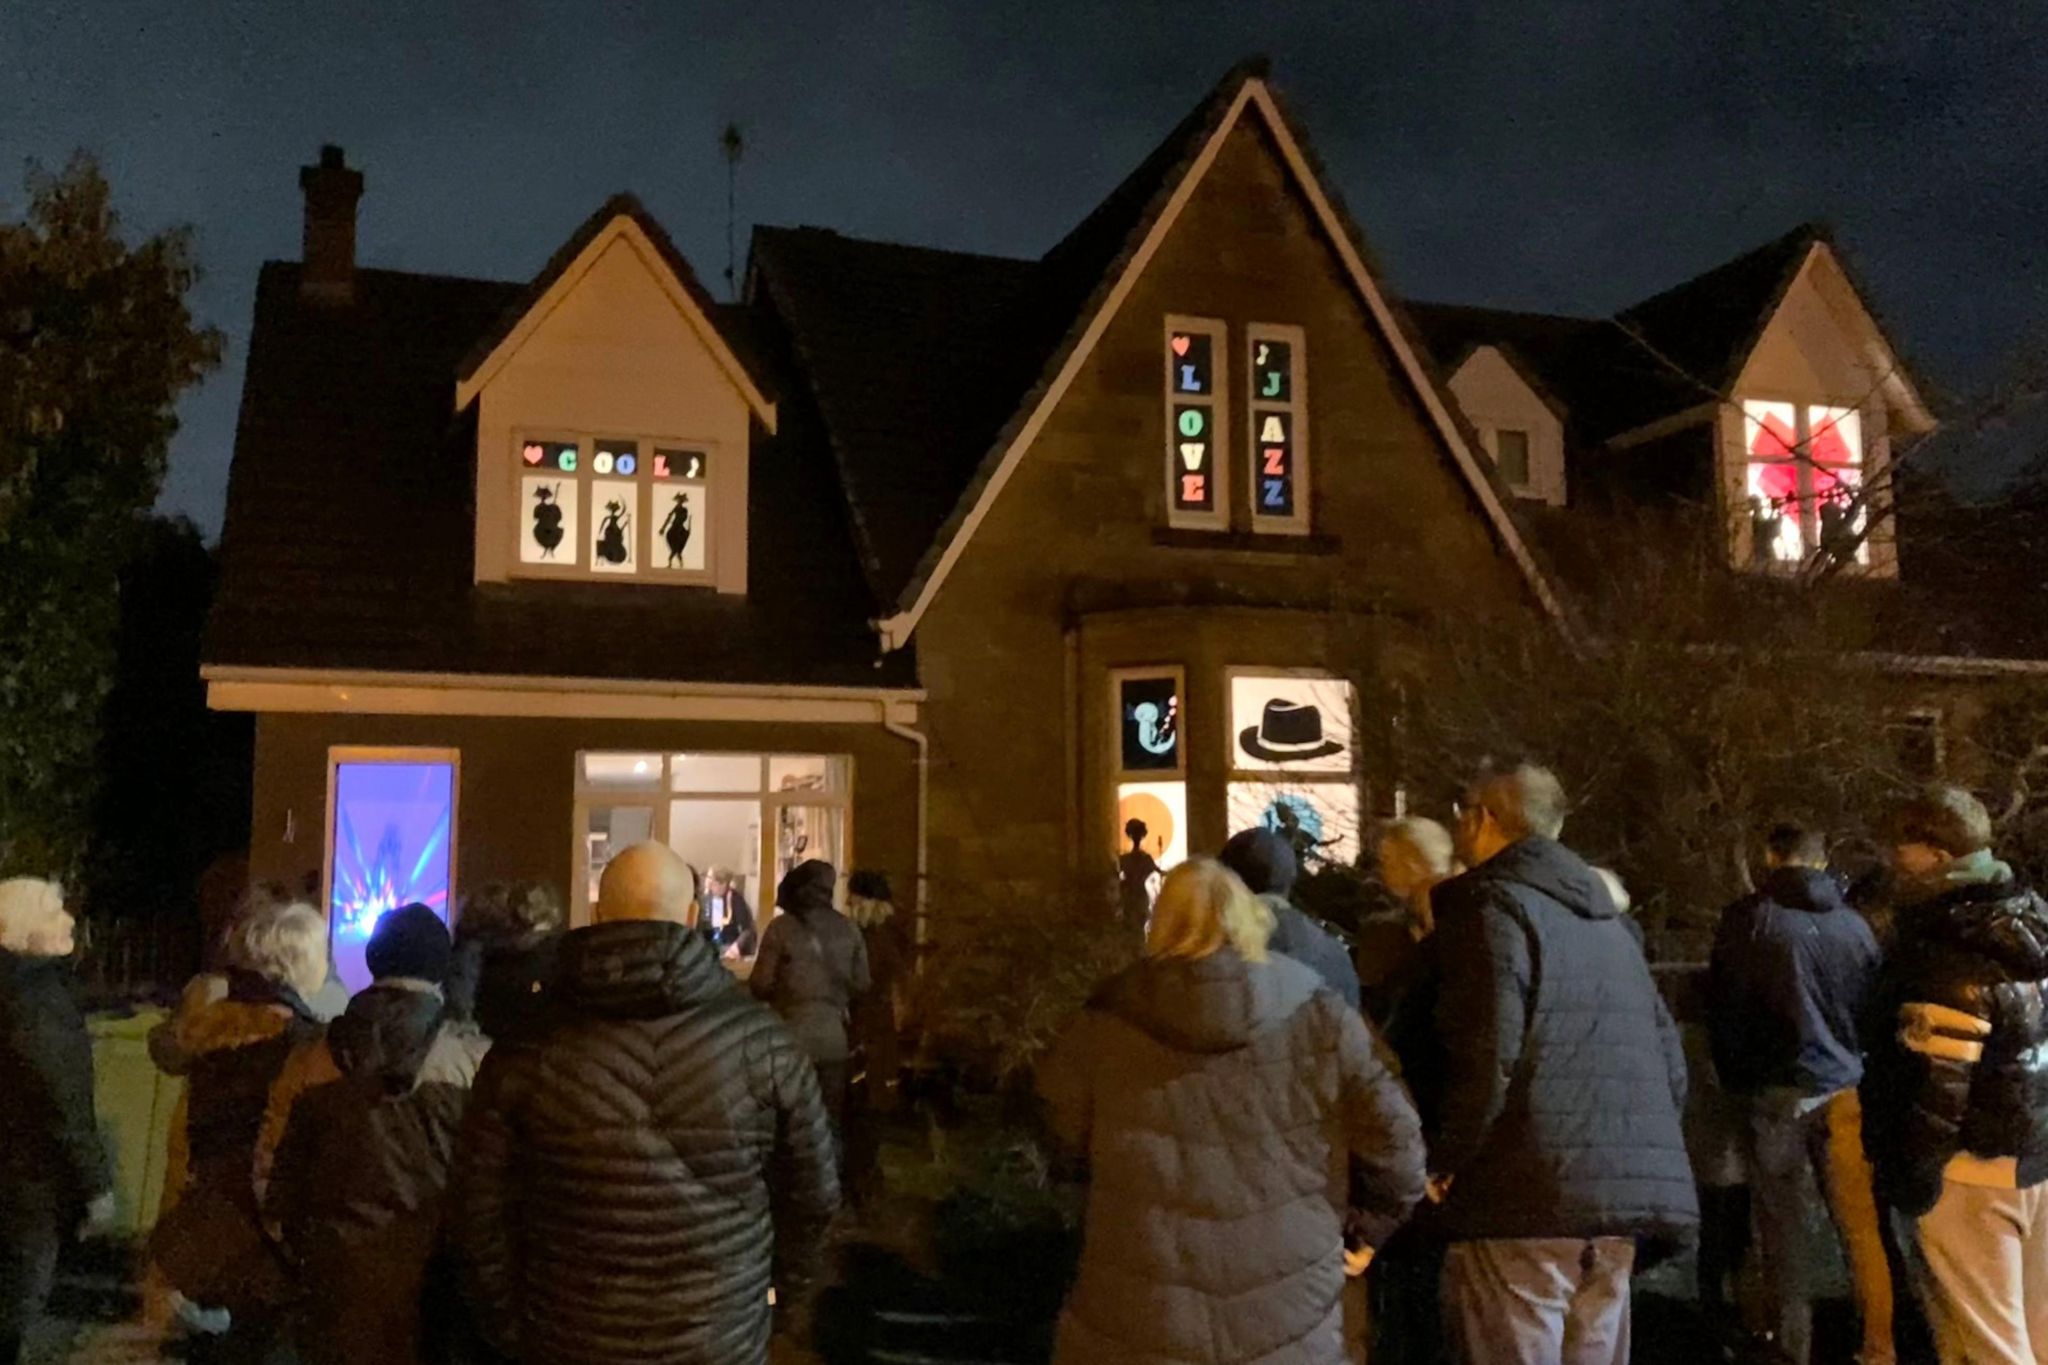 People crowd around a house with decorated windows